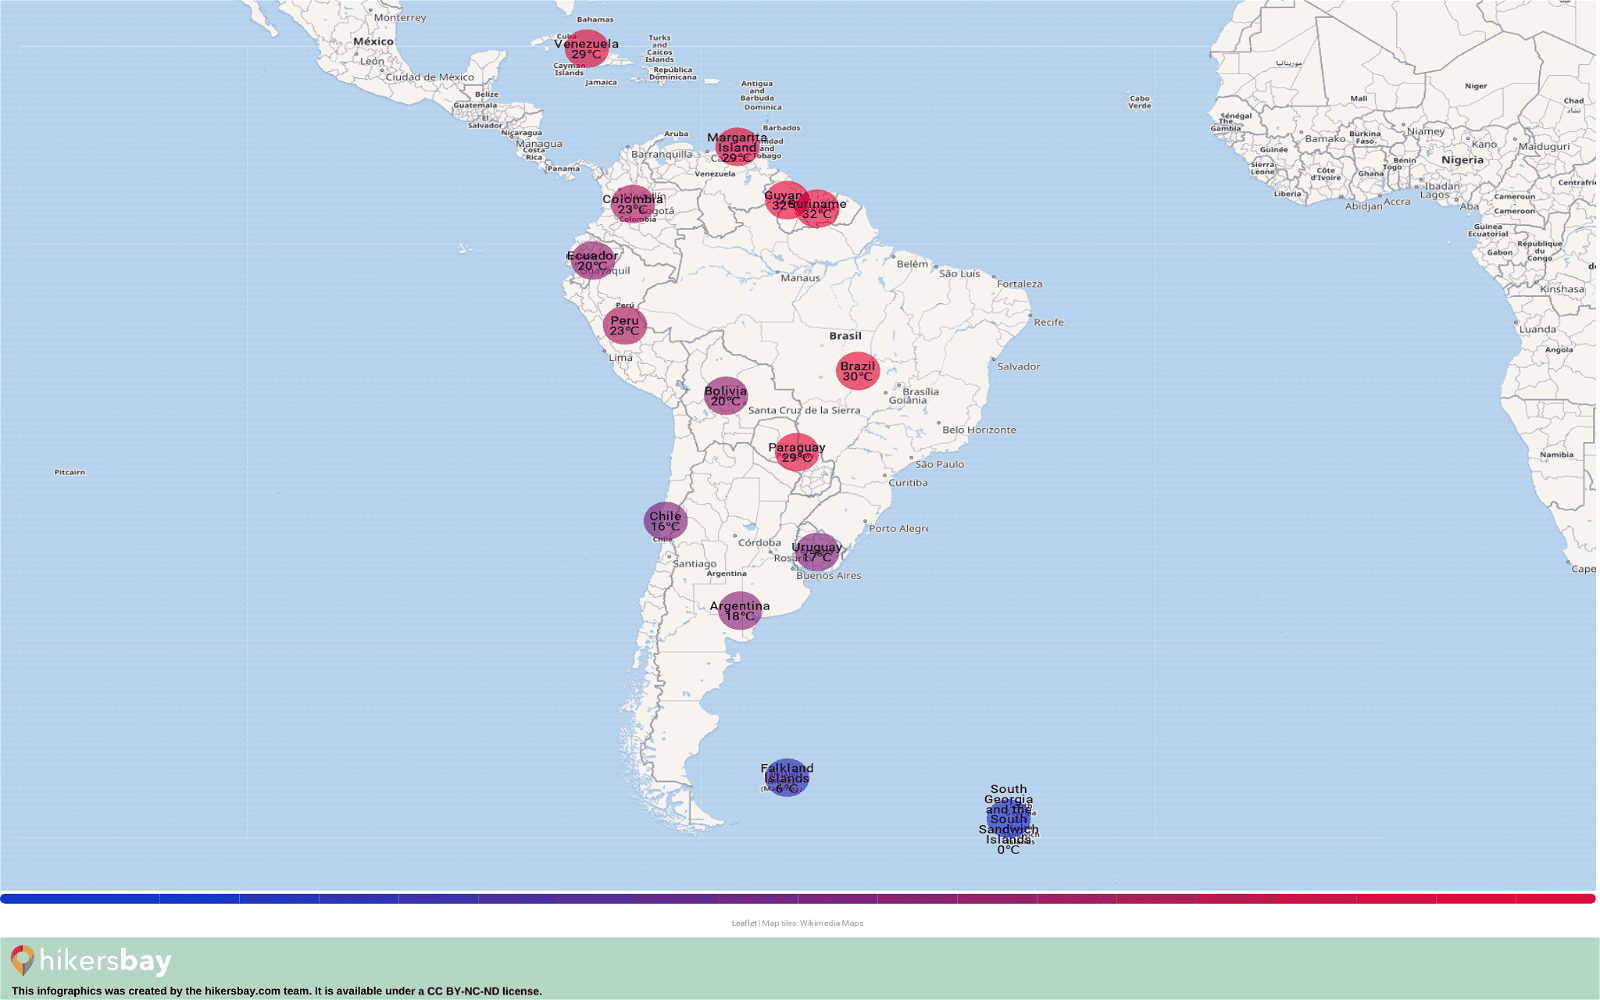 South America - Weather in August in South America 2023